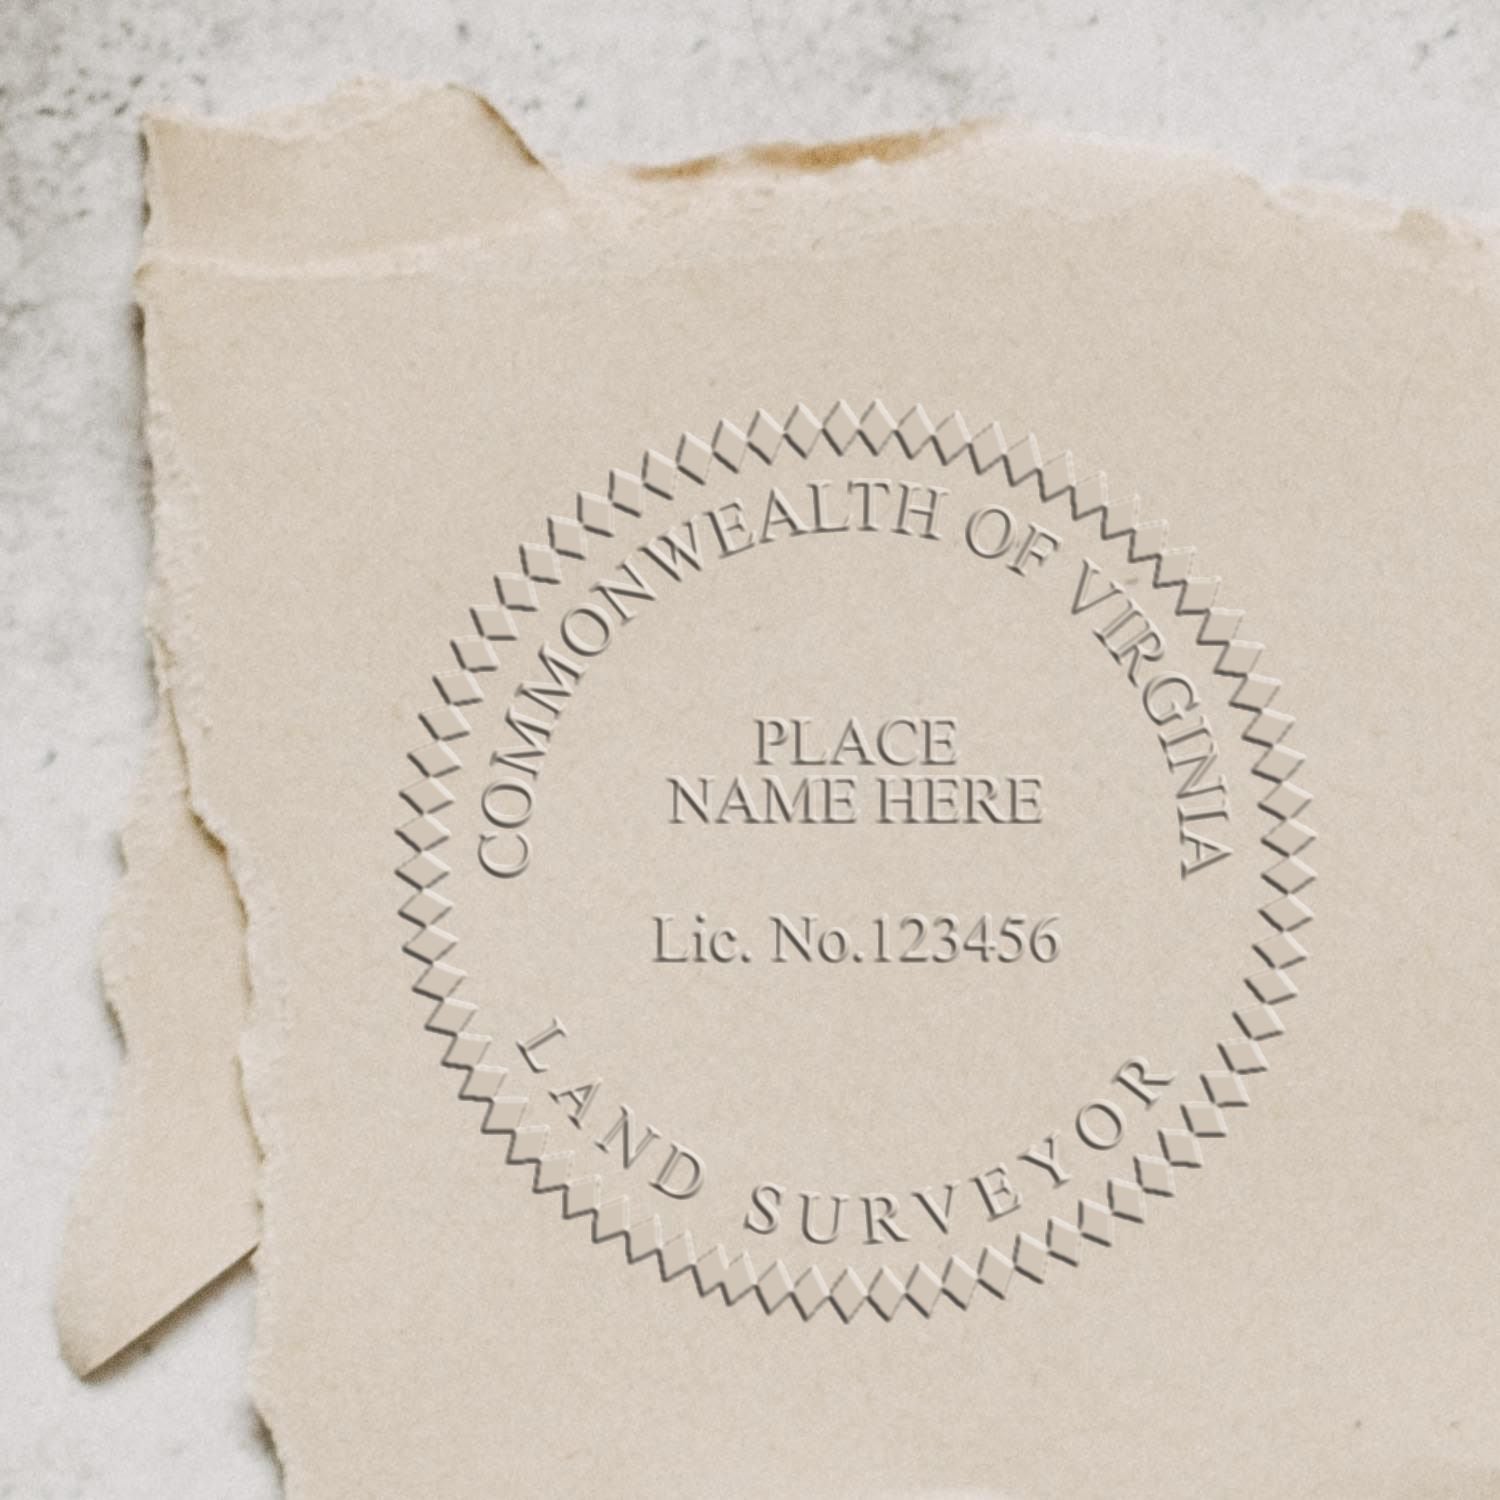 A lifestyle photo showing a stamped image of the Virginia Desk Surveyor Seal Embosser on a piece of paper